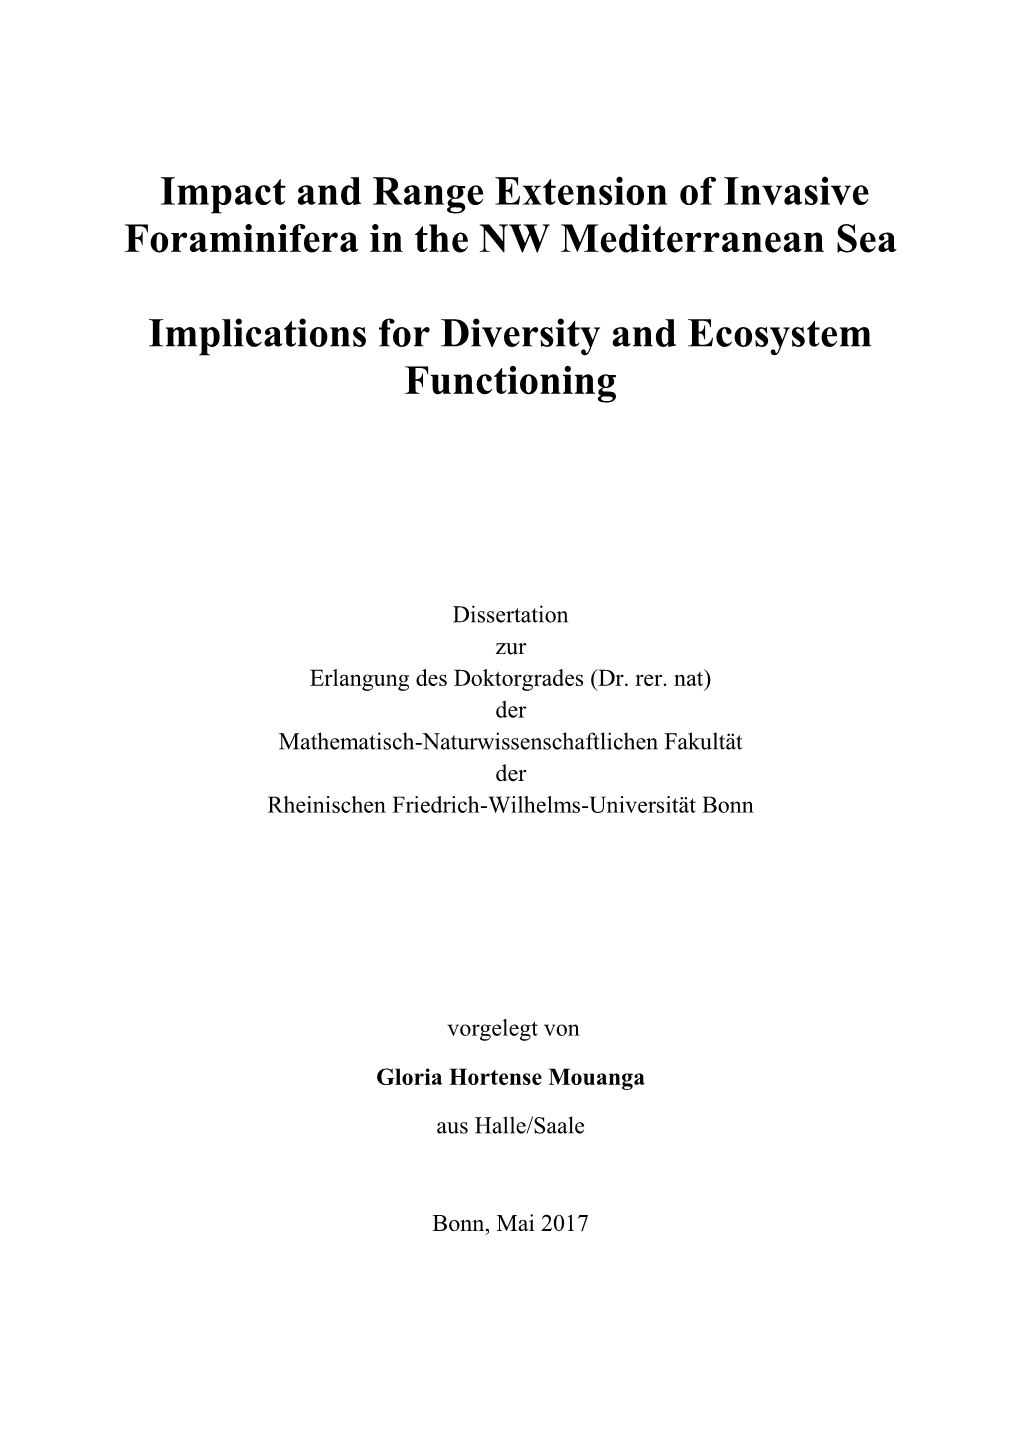 Impact and Range Extension of Invasive Foraminifera in the NW Mediterranean Sea